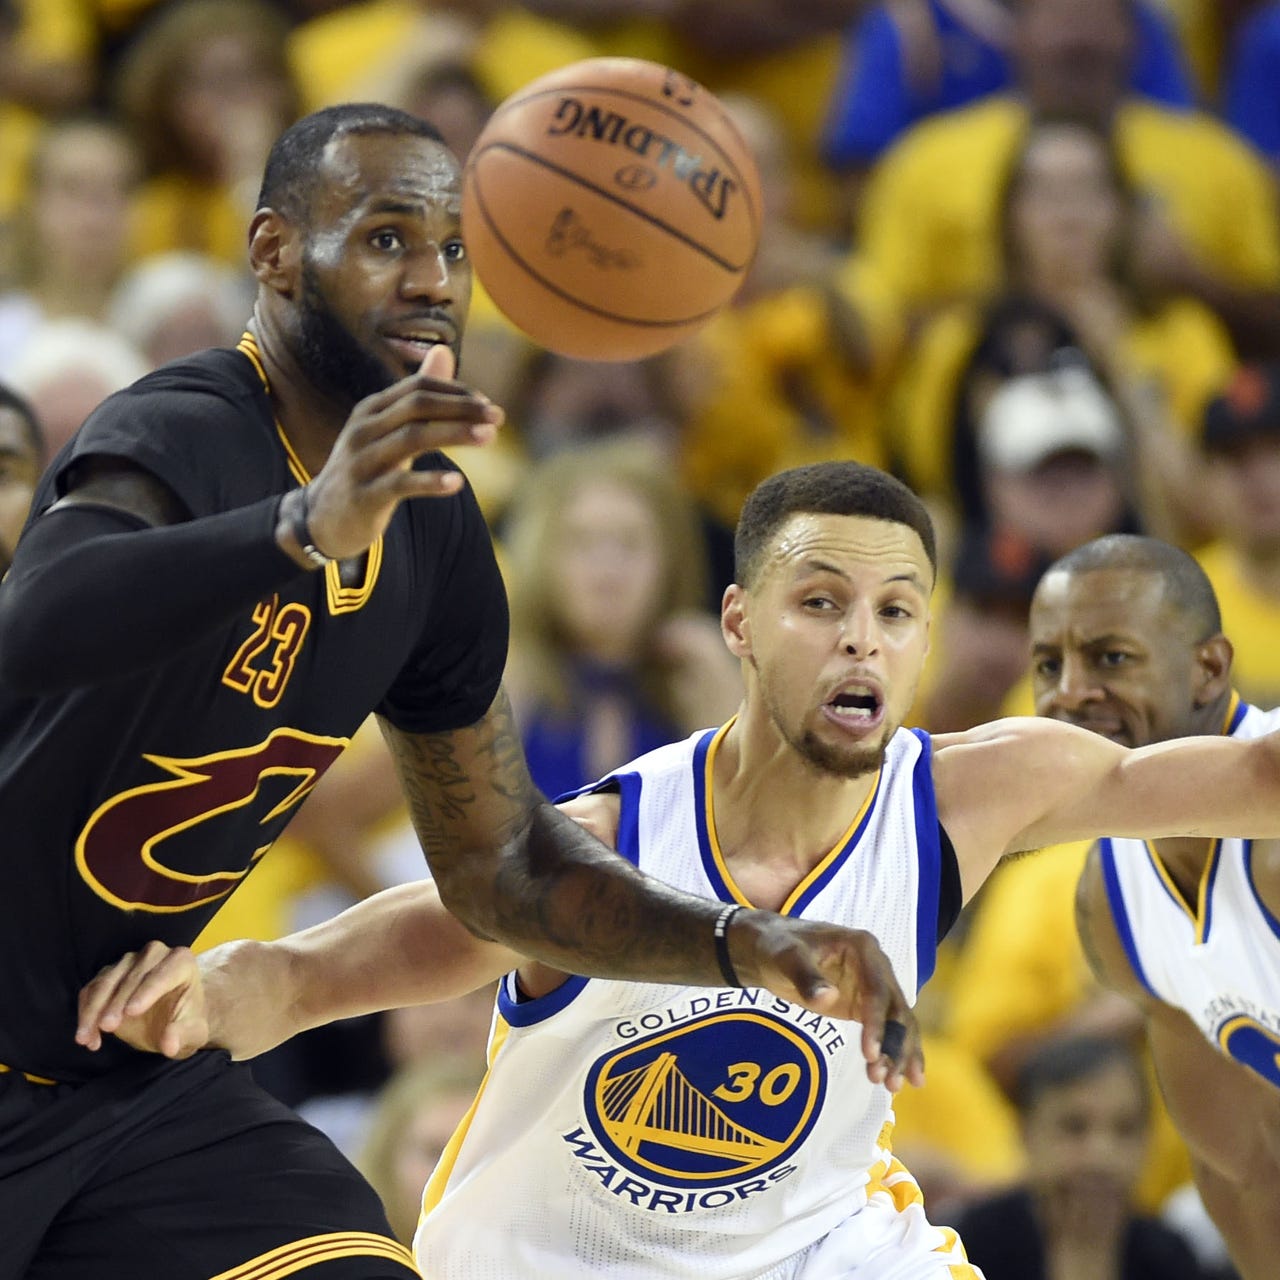 NBA Finals Preview: Warriors and Cavs set for classic